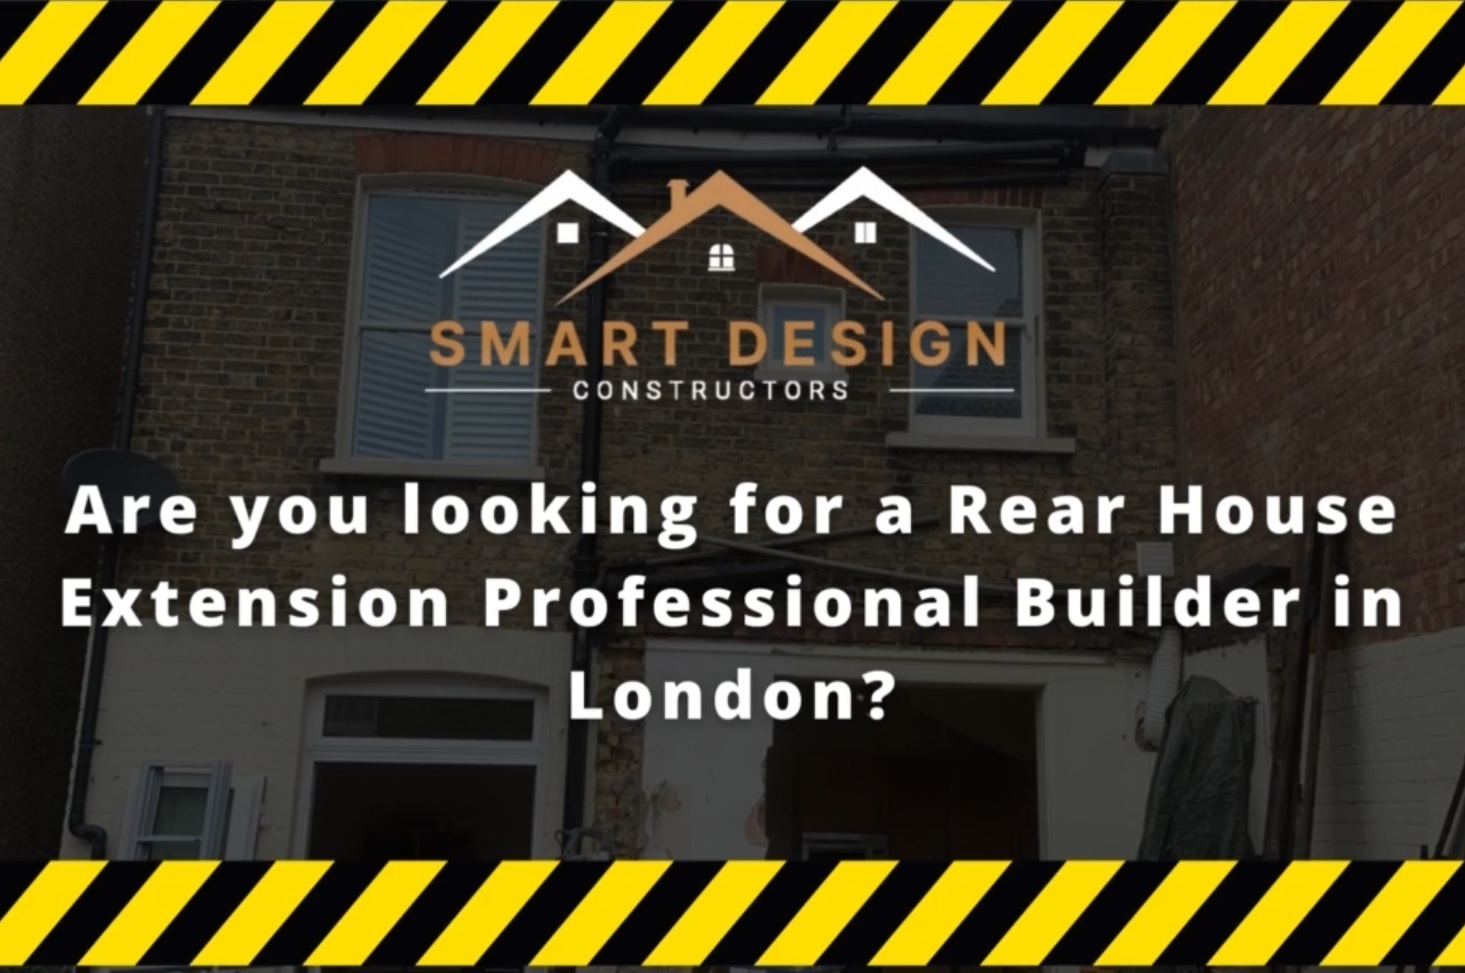 You are currently viewing Home extensions, loft and garage conversion in London with Smart Designs Constructors Ltd.